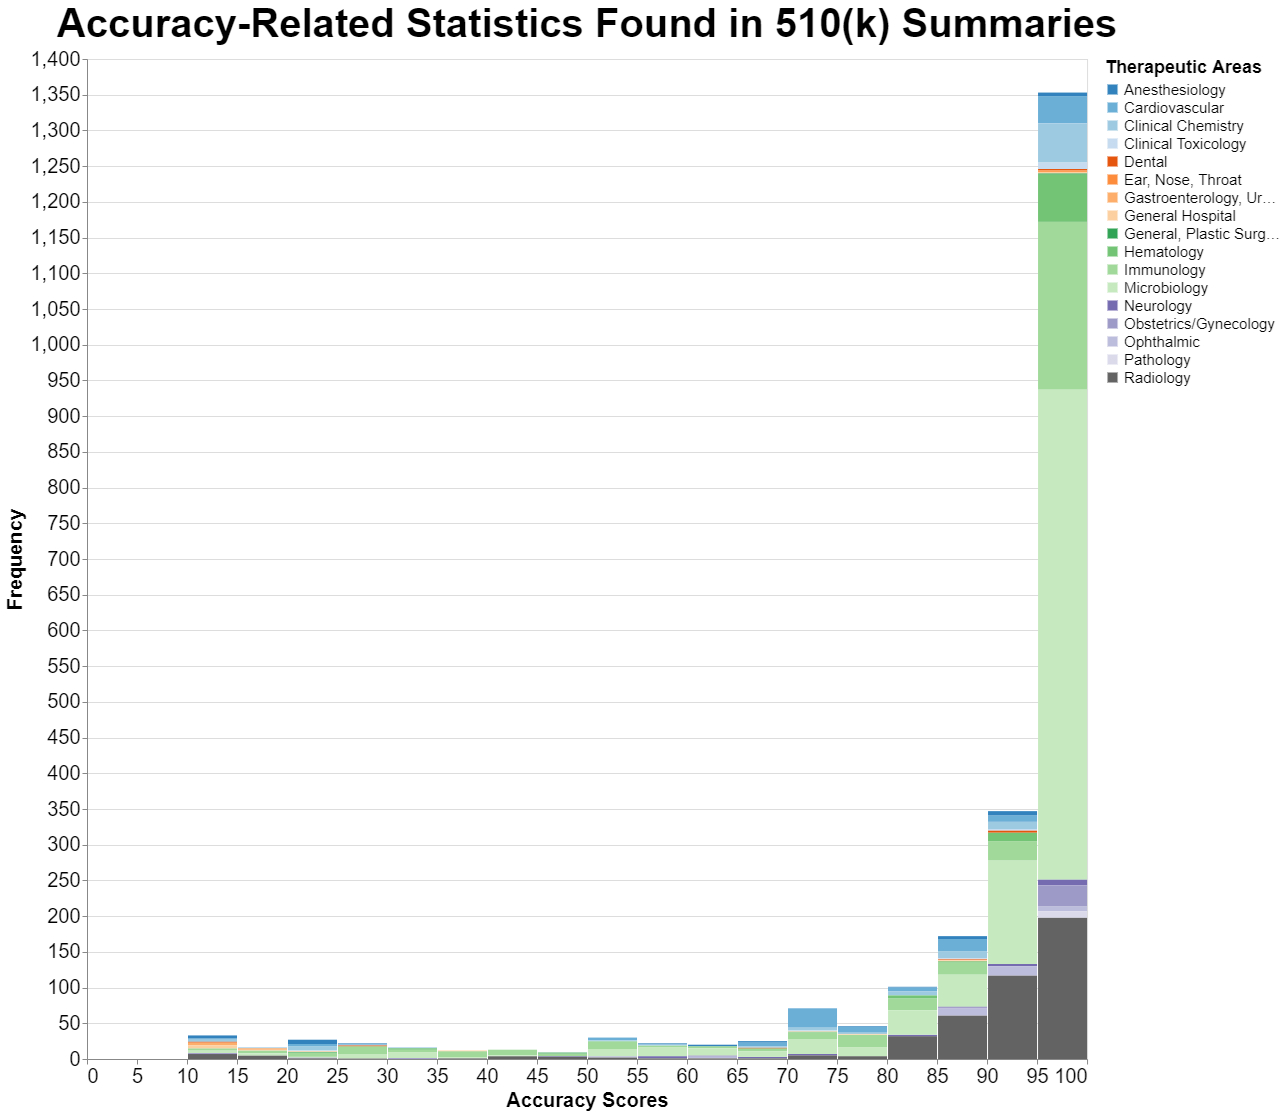 Accuracy-Related Statistics Found in 510(k) Summaries